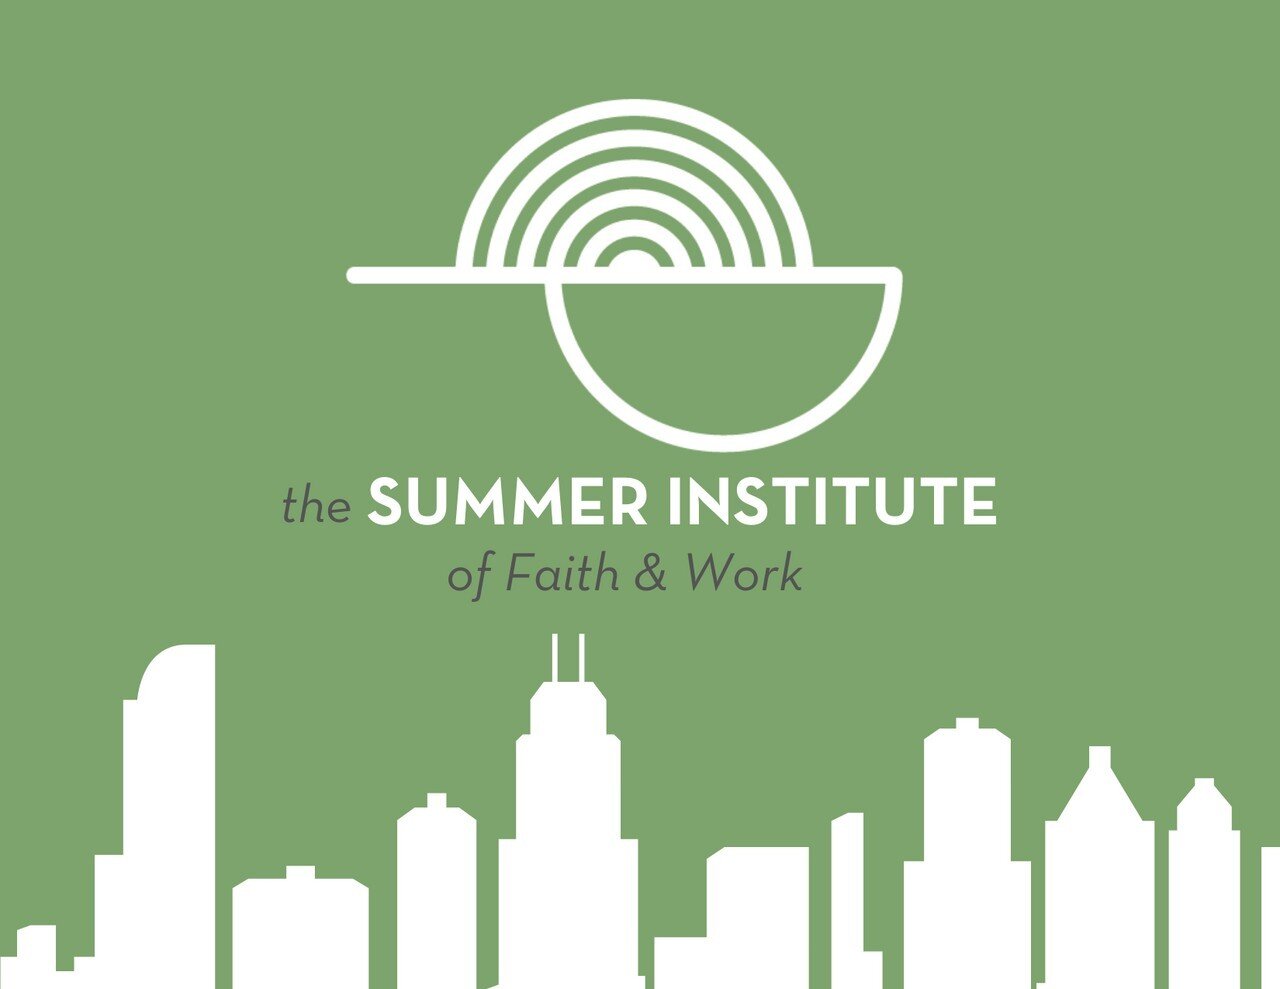 Registration is open for The Summer Insitute! Get $15 off with discount code EARLY by June 1⁠!⁠
⁠
Join us in person Tuesday evenings from June 13-July 25 (skipping July 4) to explore the story our culture tells us about work and how we need to be re-